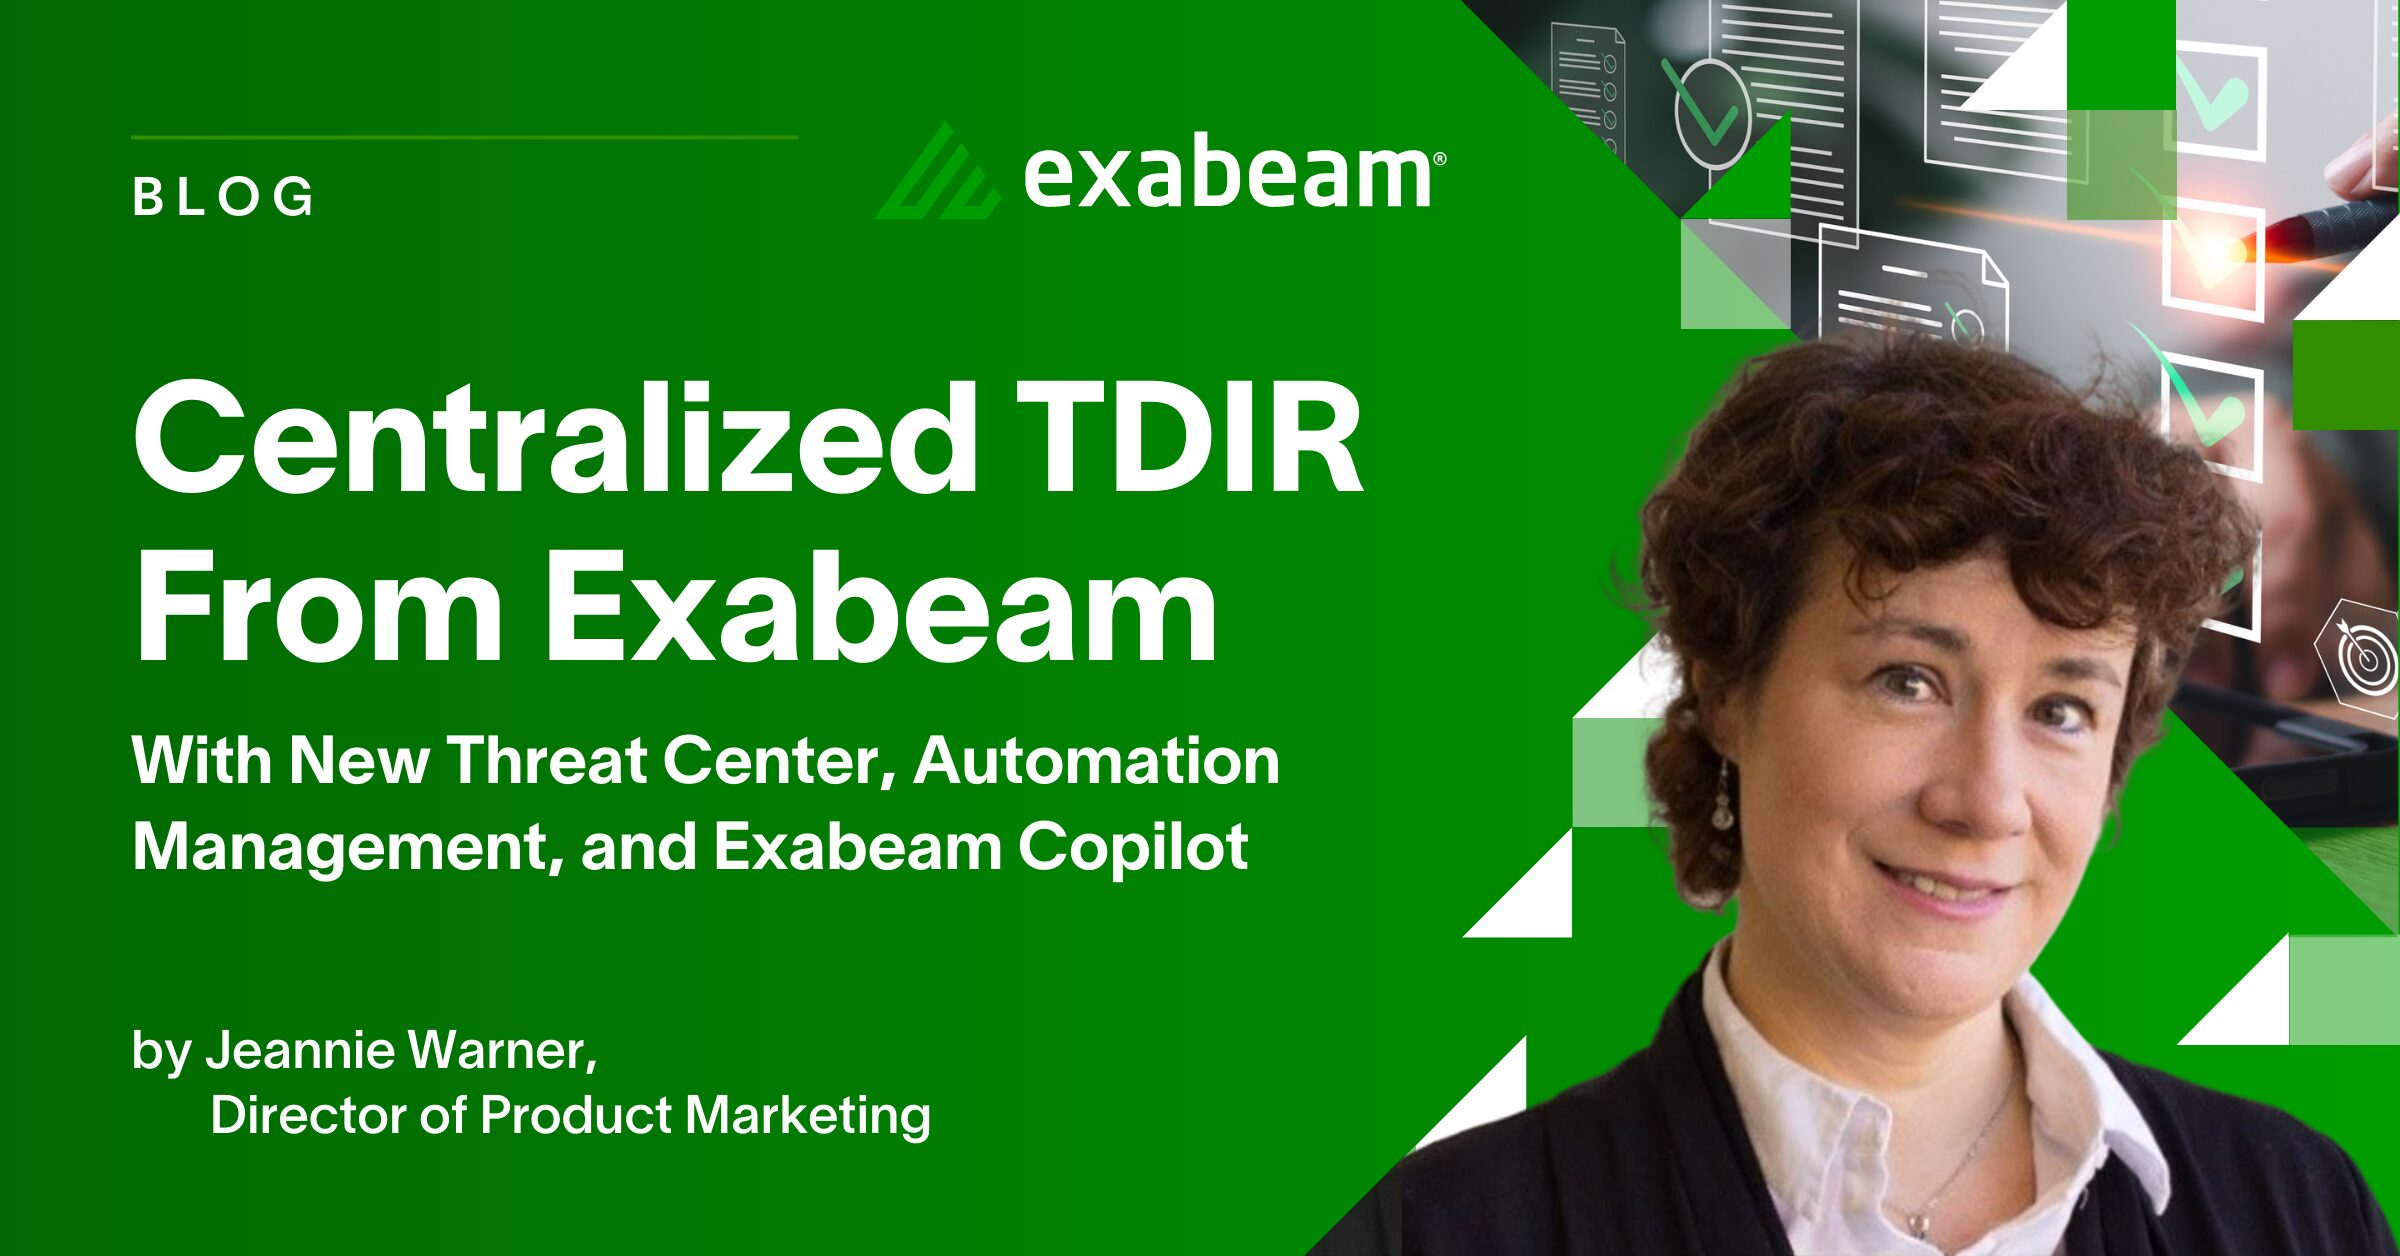 Centralized TDIR From Exabeam With New Threat Center, Automation Management, and Exabeam Copilot